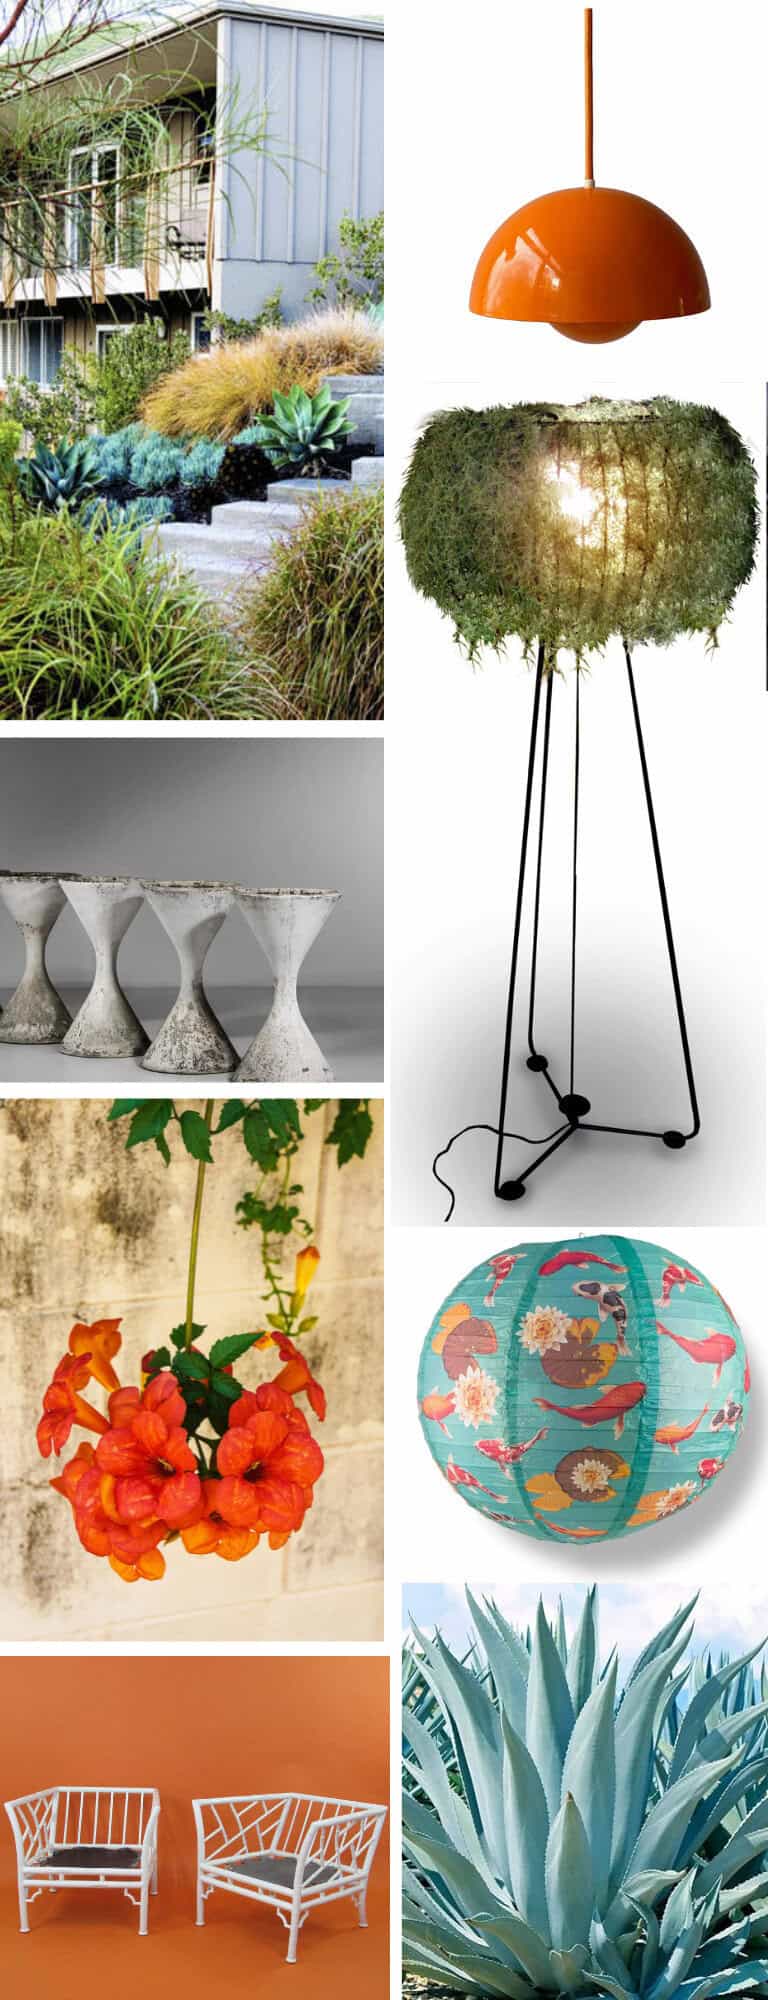 A collage featuring various design and nature elements: a modern building with greenery, an orange pendant lamp, a moss-covered floor lamp, stone stools, orange flowers, a colorful floral-patterned sphere reminiscent of a Christian Dior garden, white garden chairs, and a close-up of a spiky plant.